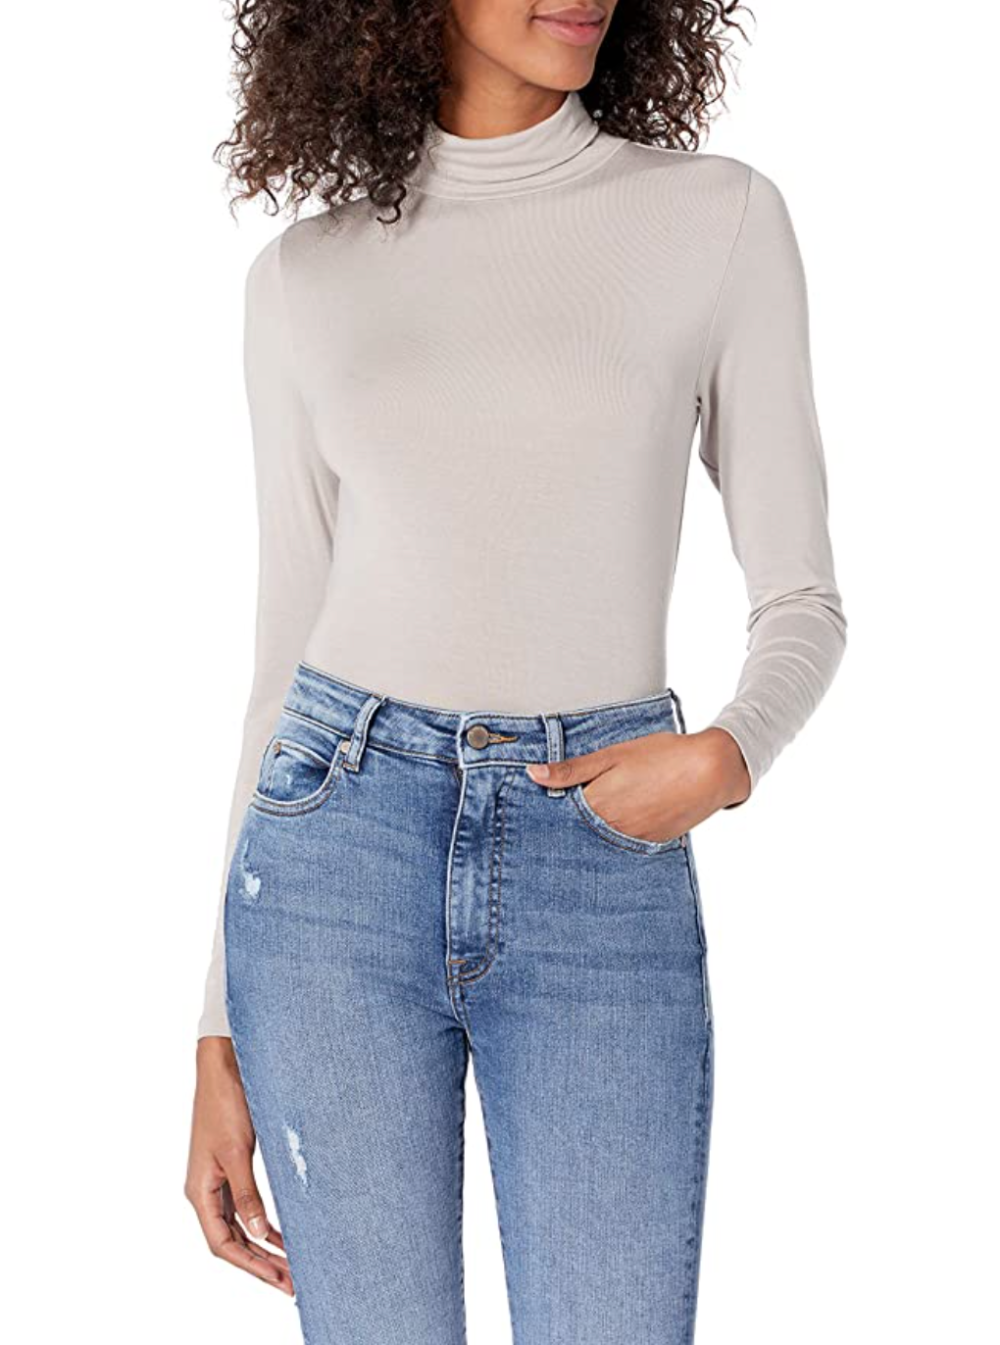 9 Trendy Second-Skin Tops to Shop on Amazon Now